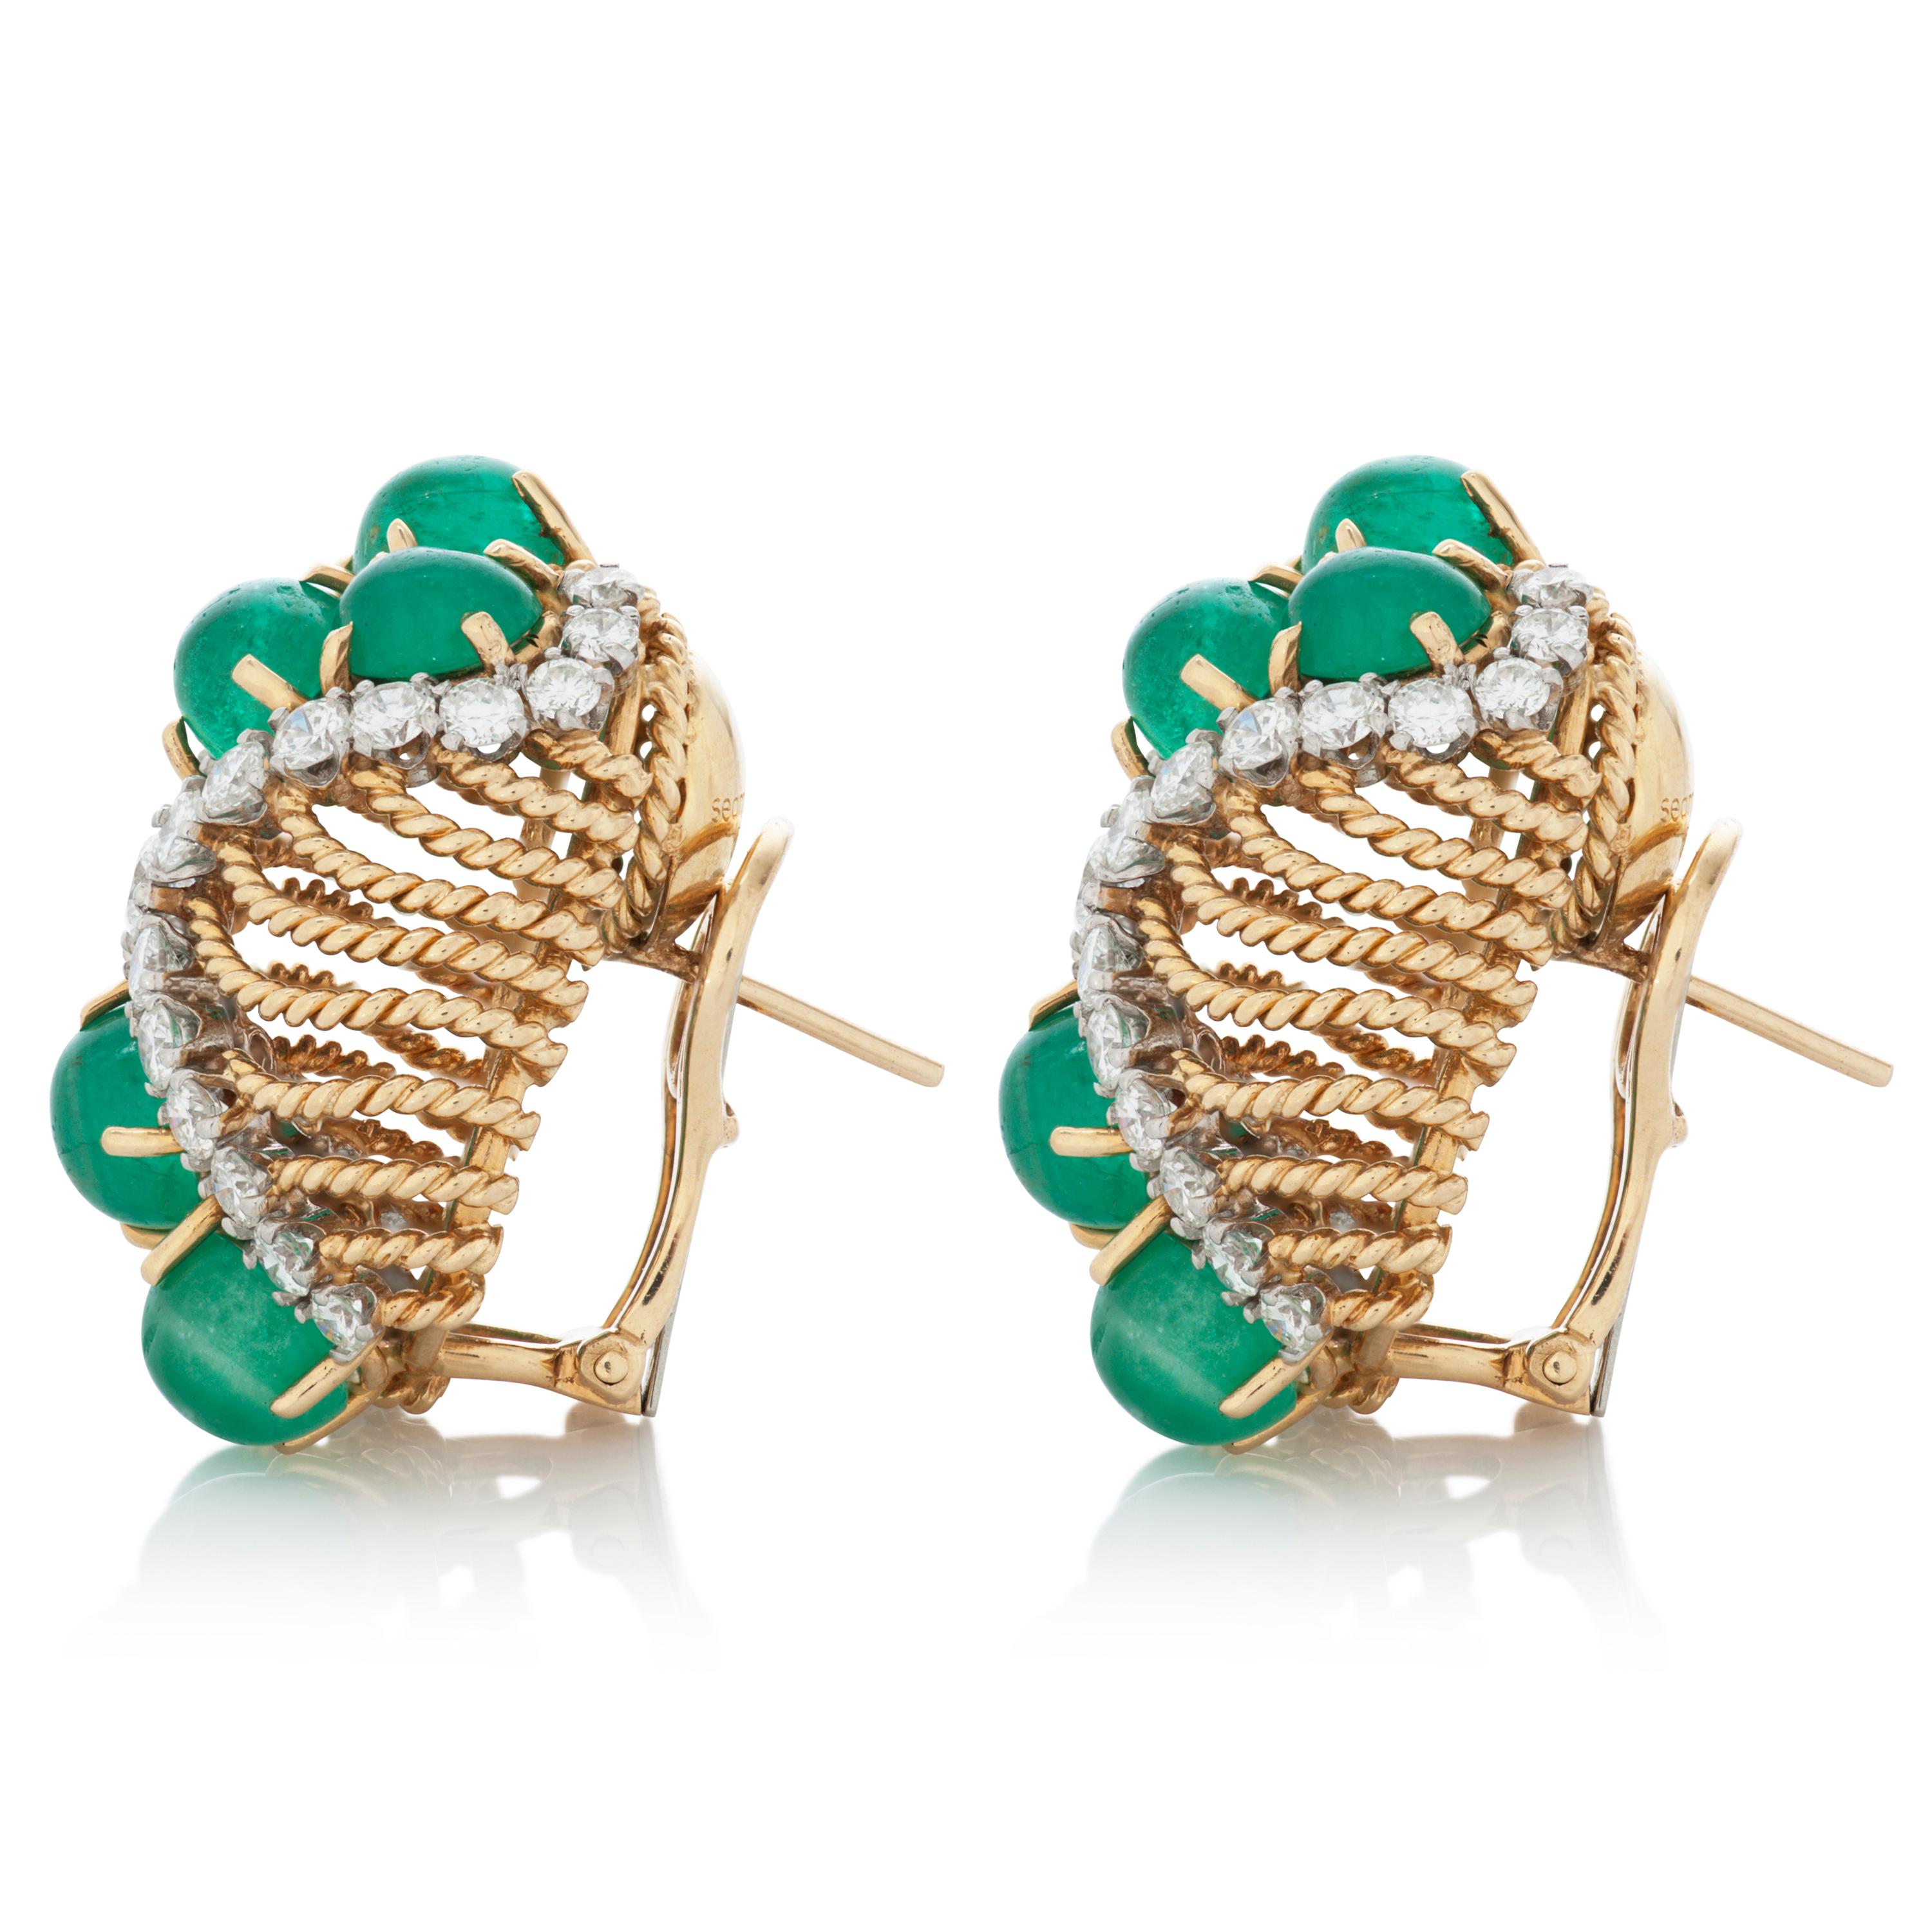 This pair of vintage Seaman Schepps earrings feature 12 cabochon emeralds totaling approximately 13 carats set in 18k yellow gold, as well as 3 carats of round brilliant cut diamonds with G-H color and VS clarity set in platinum.

Approximately 30mm